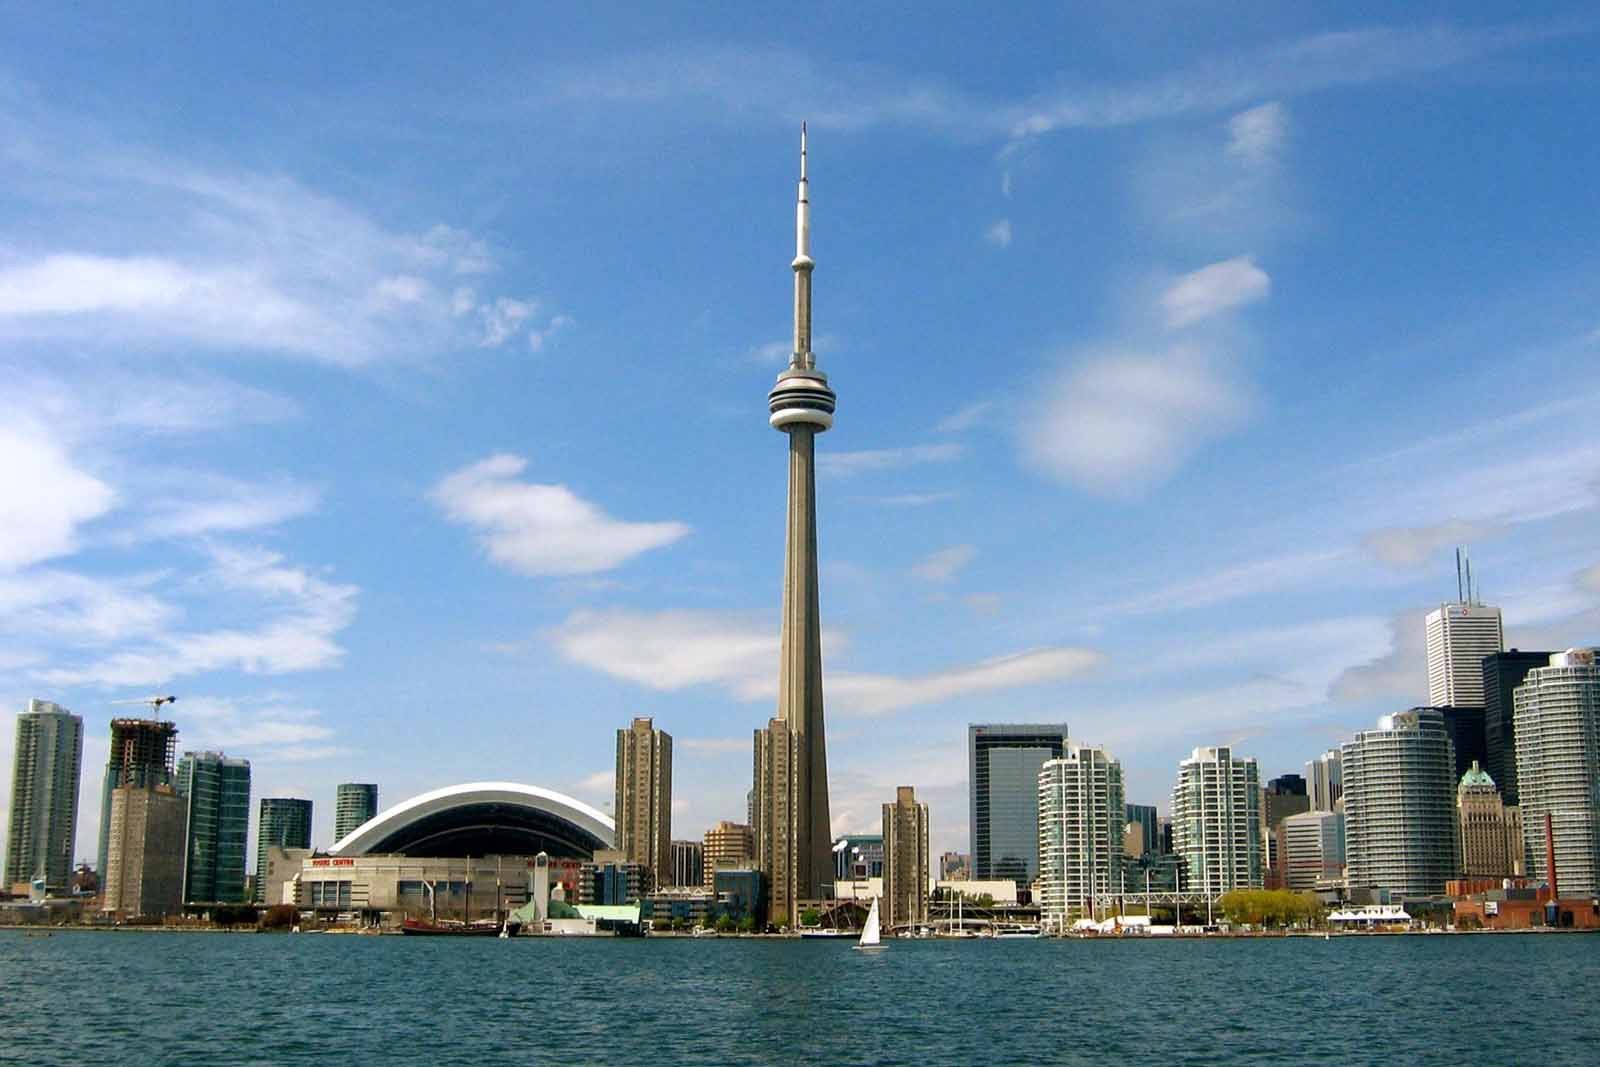 How to ascend the CN Tower in Toronto